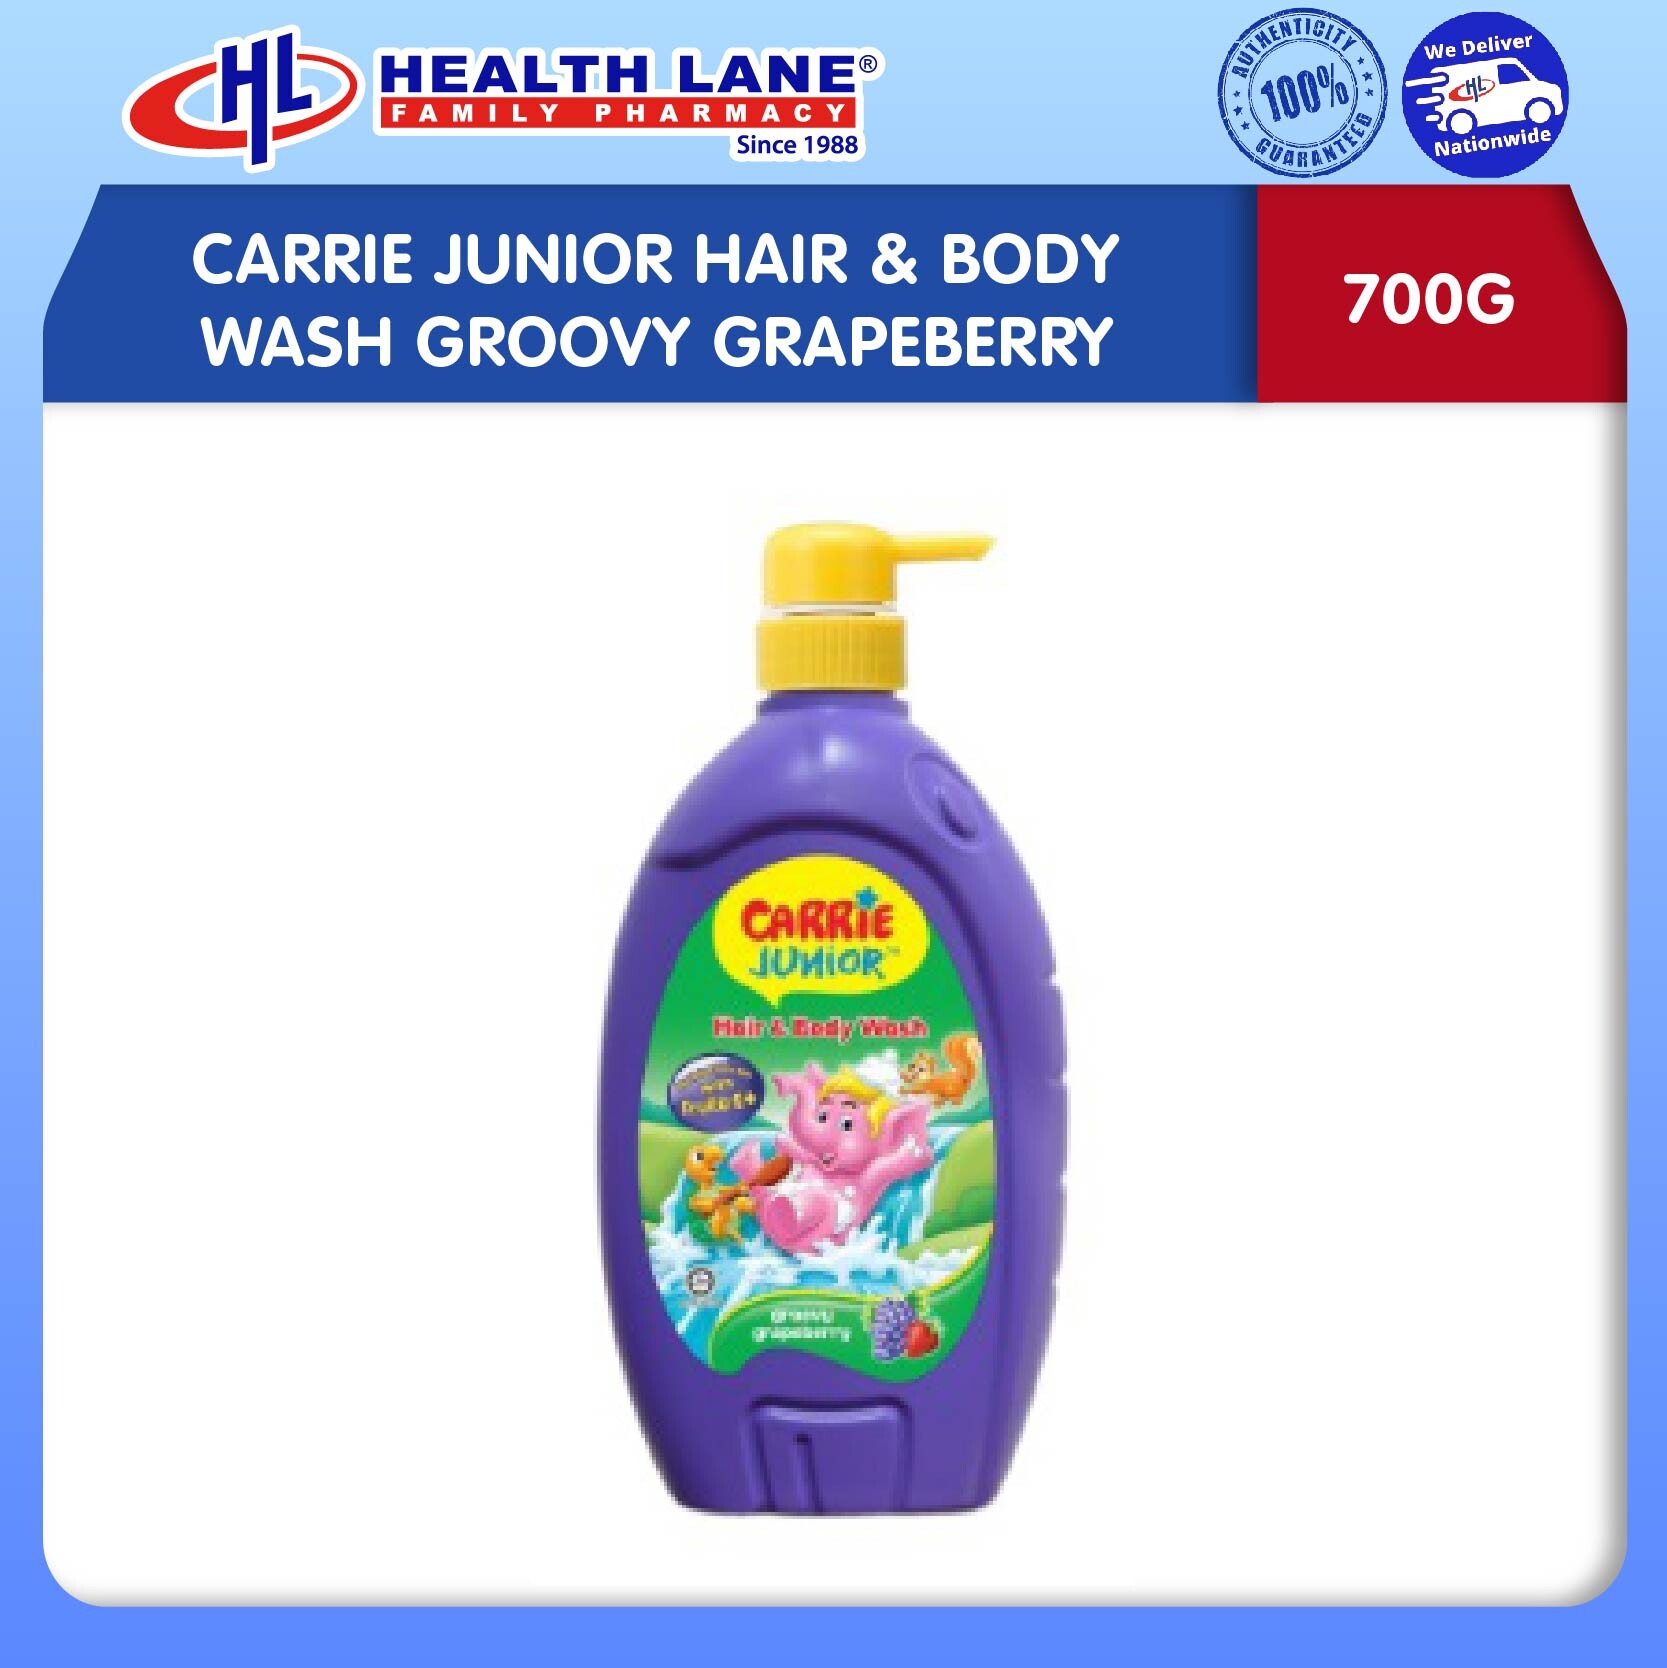 CARRIE JUNIOR HAIR & BODY WASH GROOVY GRAPEBERRY (700G)